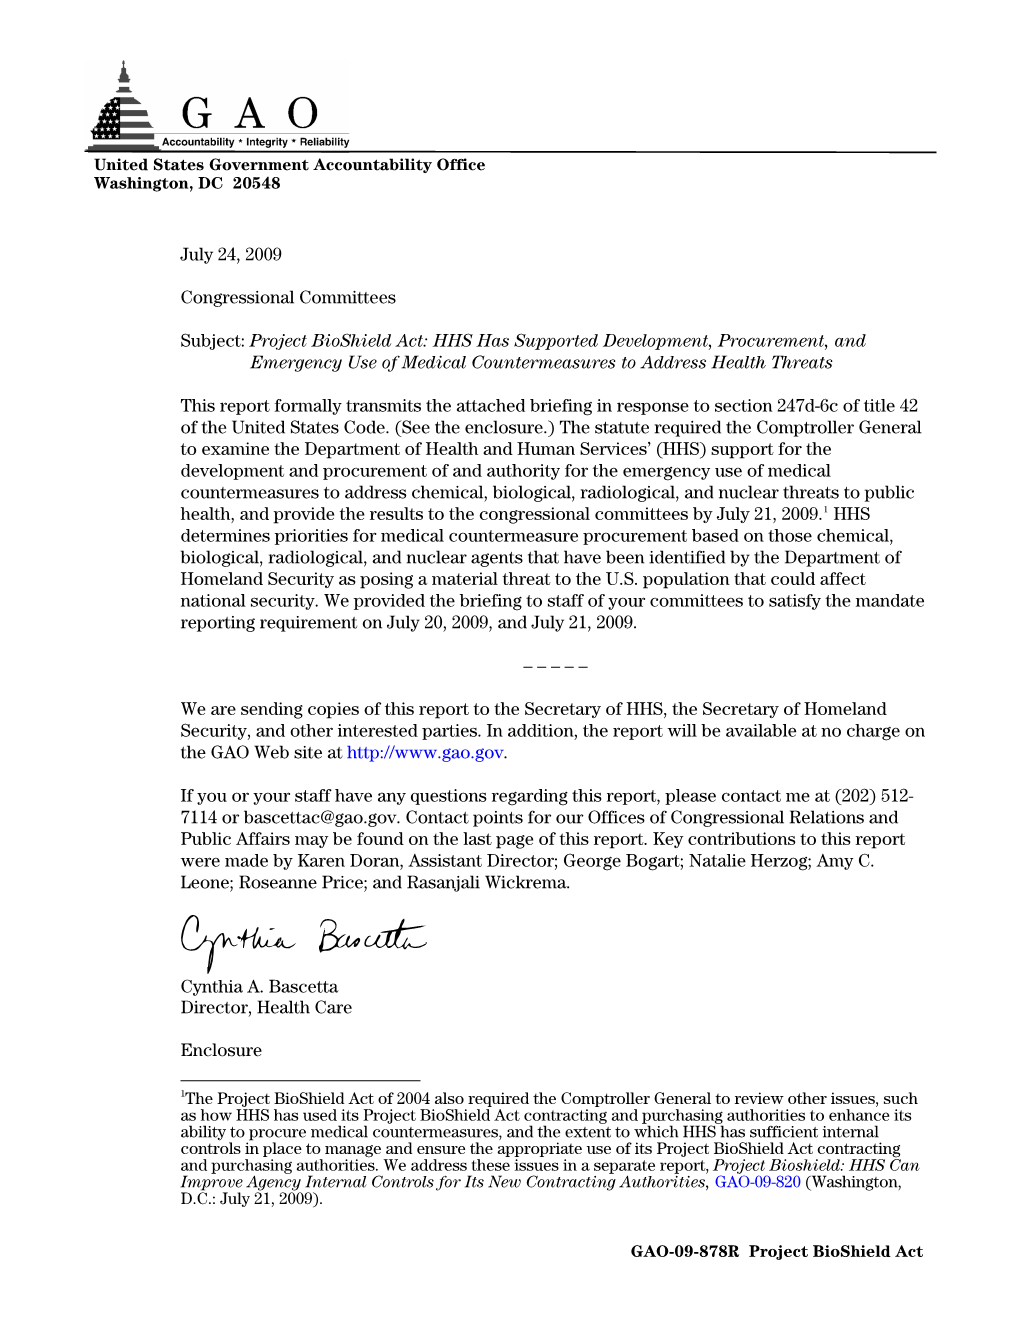 GAO-09-878R Project Bioshield Act: HHS Has Supported Development